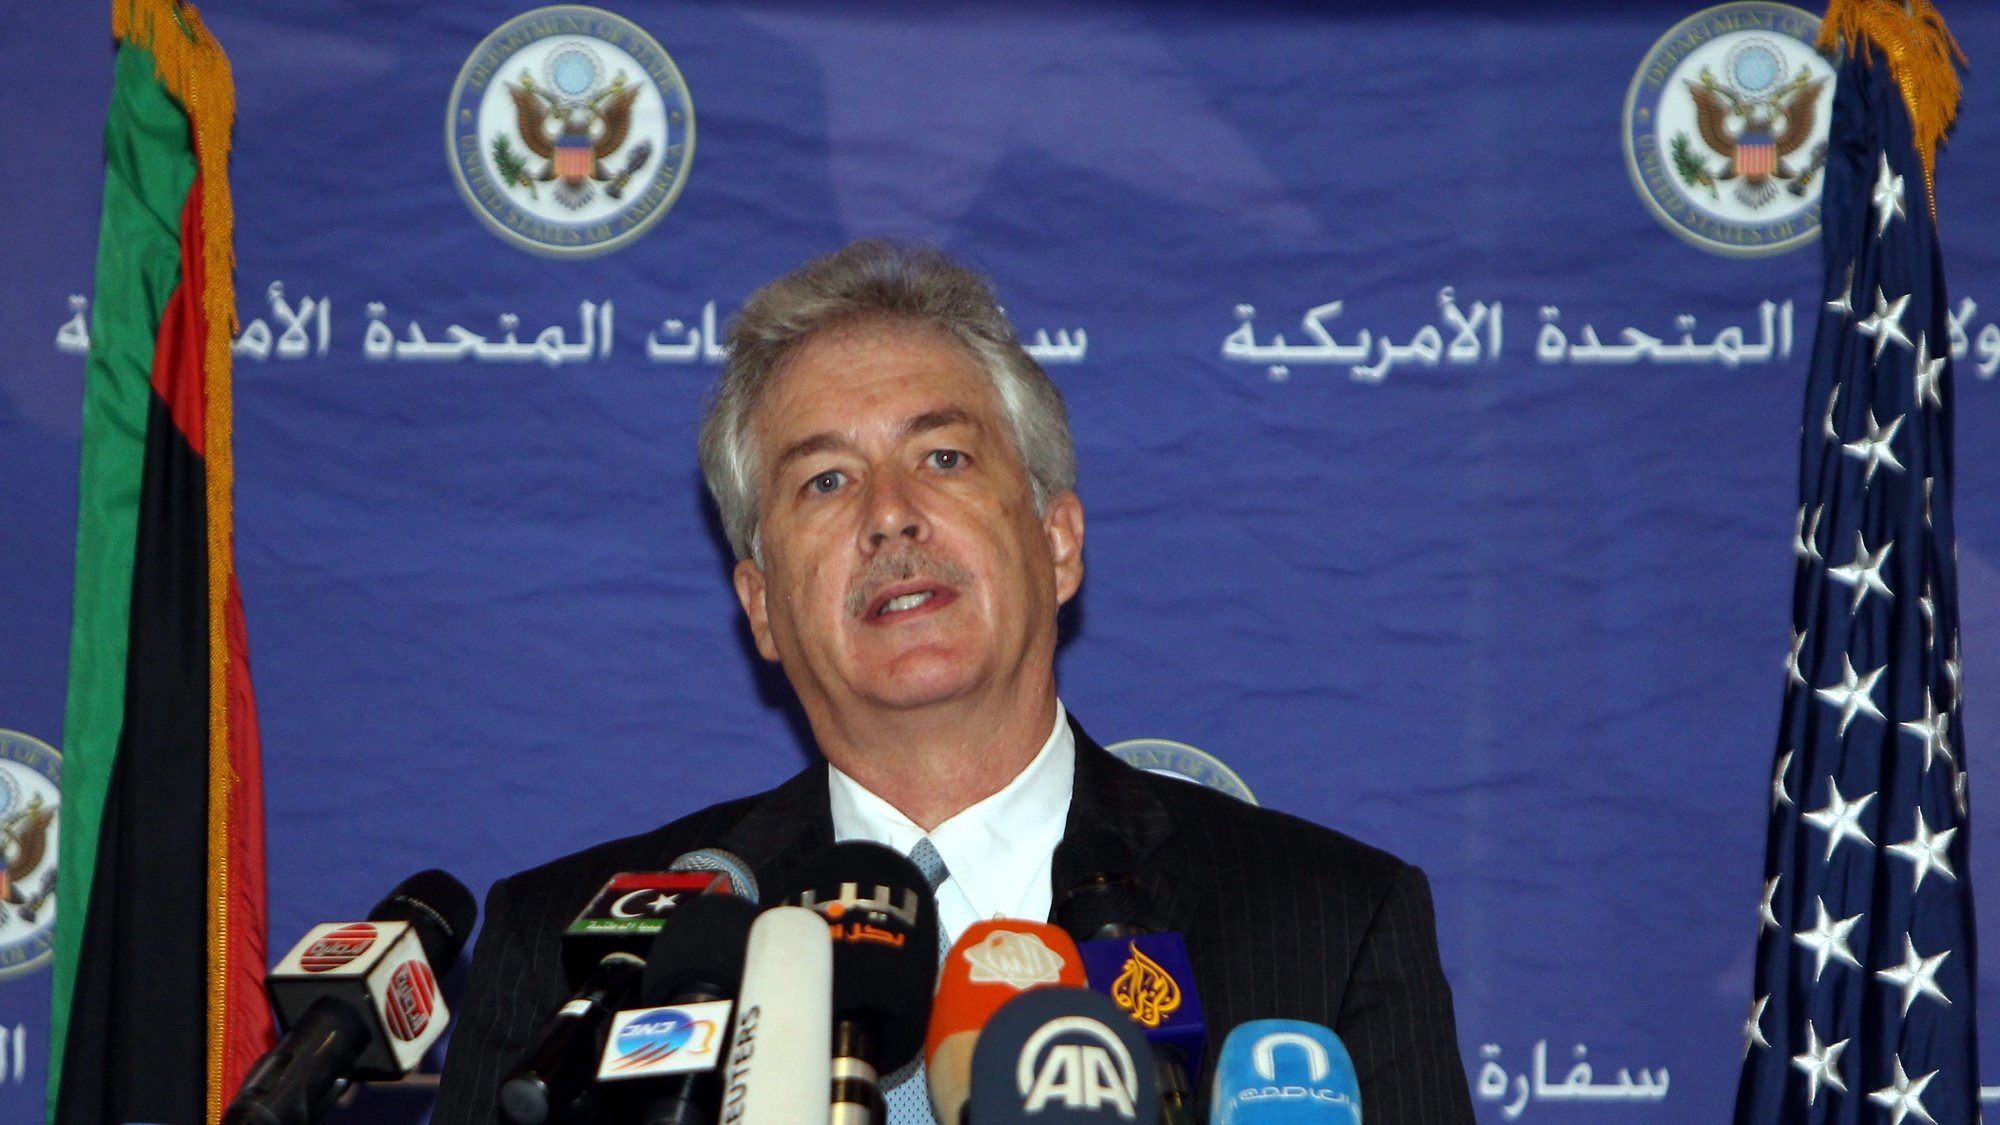 epa04178234 US Deputy Secretary of State William Burns speaks during a press conference in Tripoli, Libya, 24 April 2014. Burns arrived in Libya on 23 April to meet with senior officials. The State Department said the trip reaffirms the US support for the Libyan people as they work to achieve the aspirations of the revolution.  EPA/SABRI ELMHEDWI